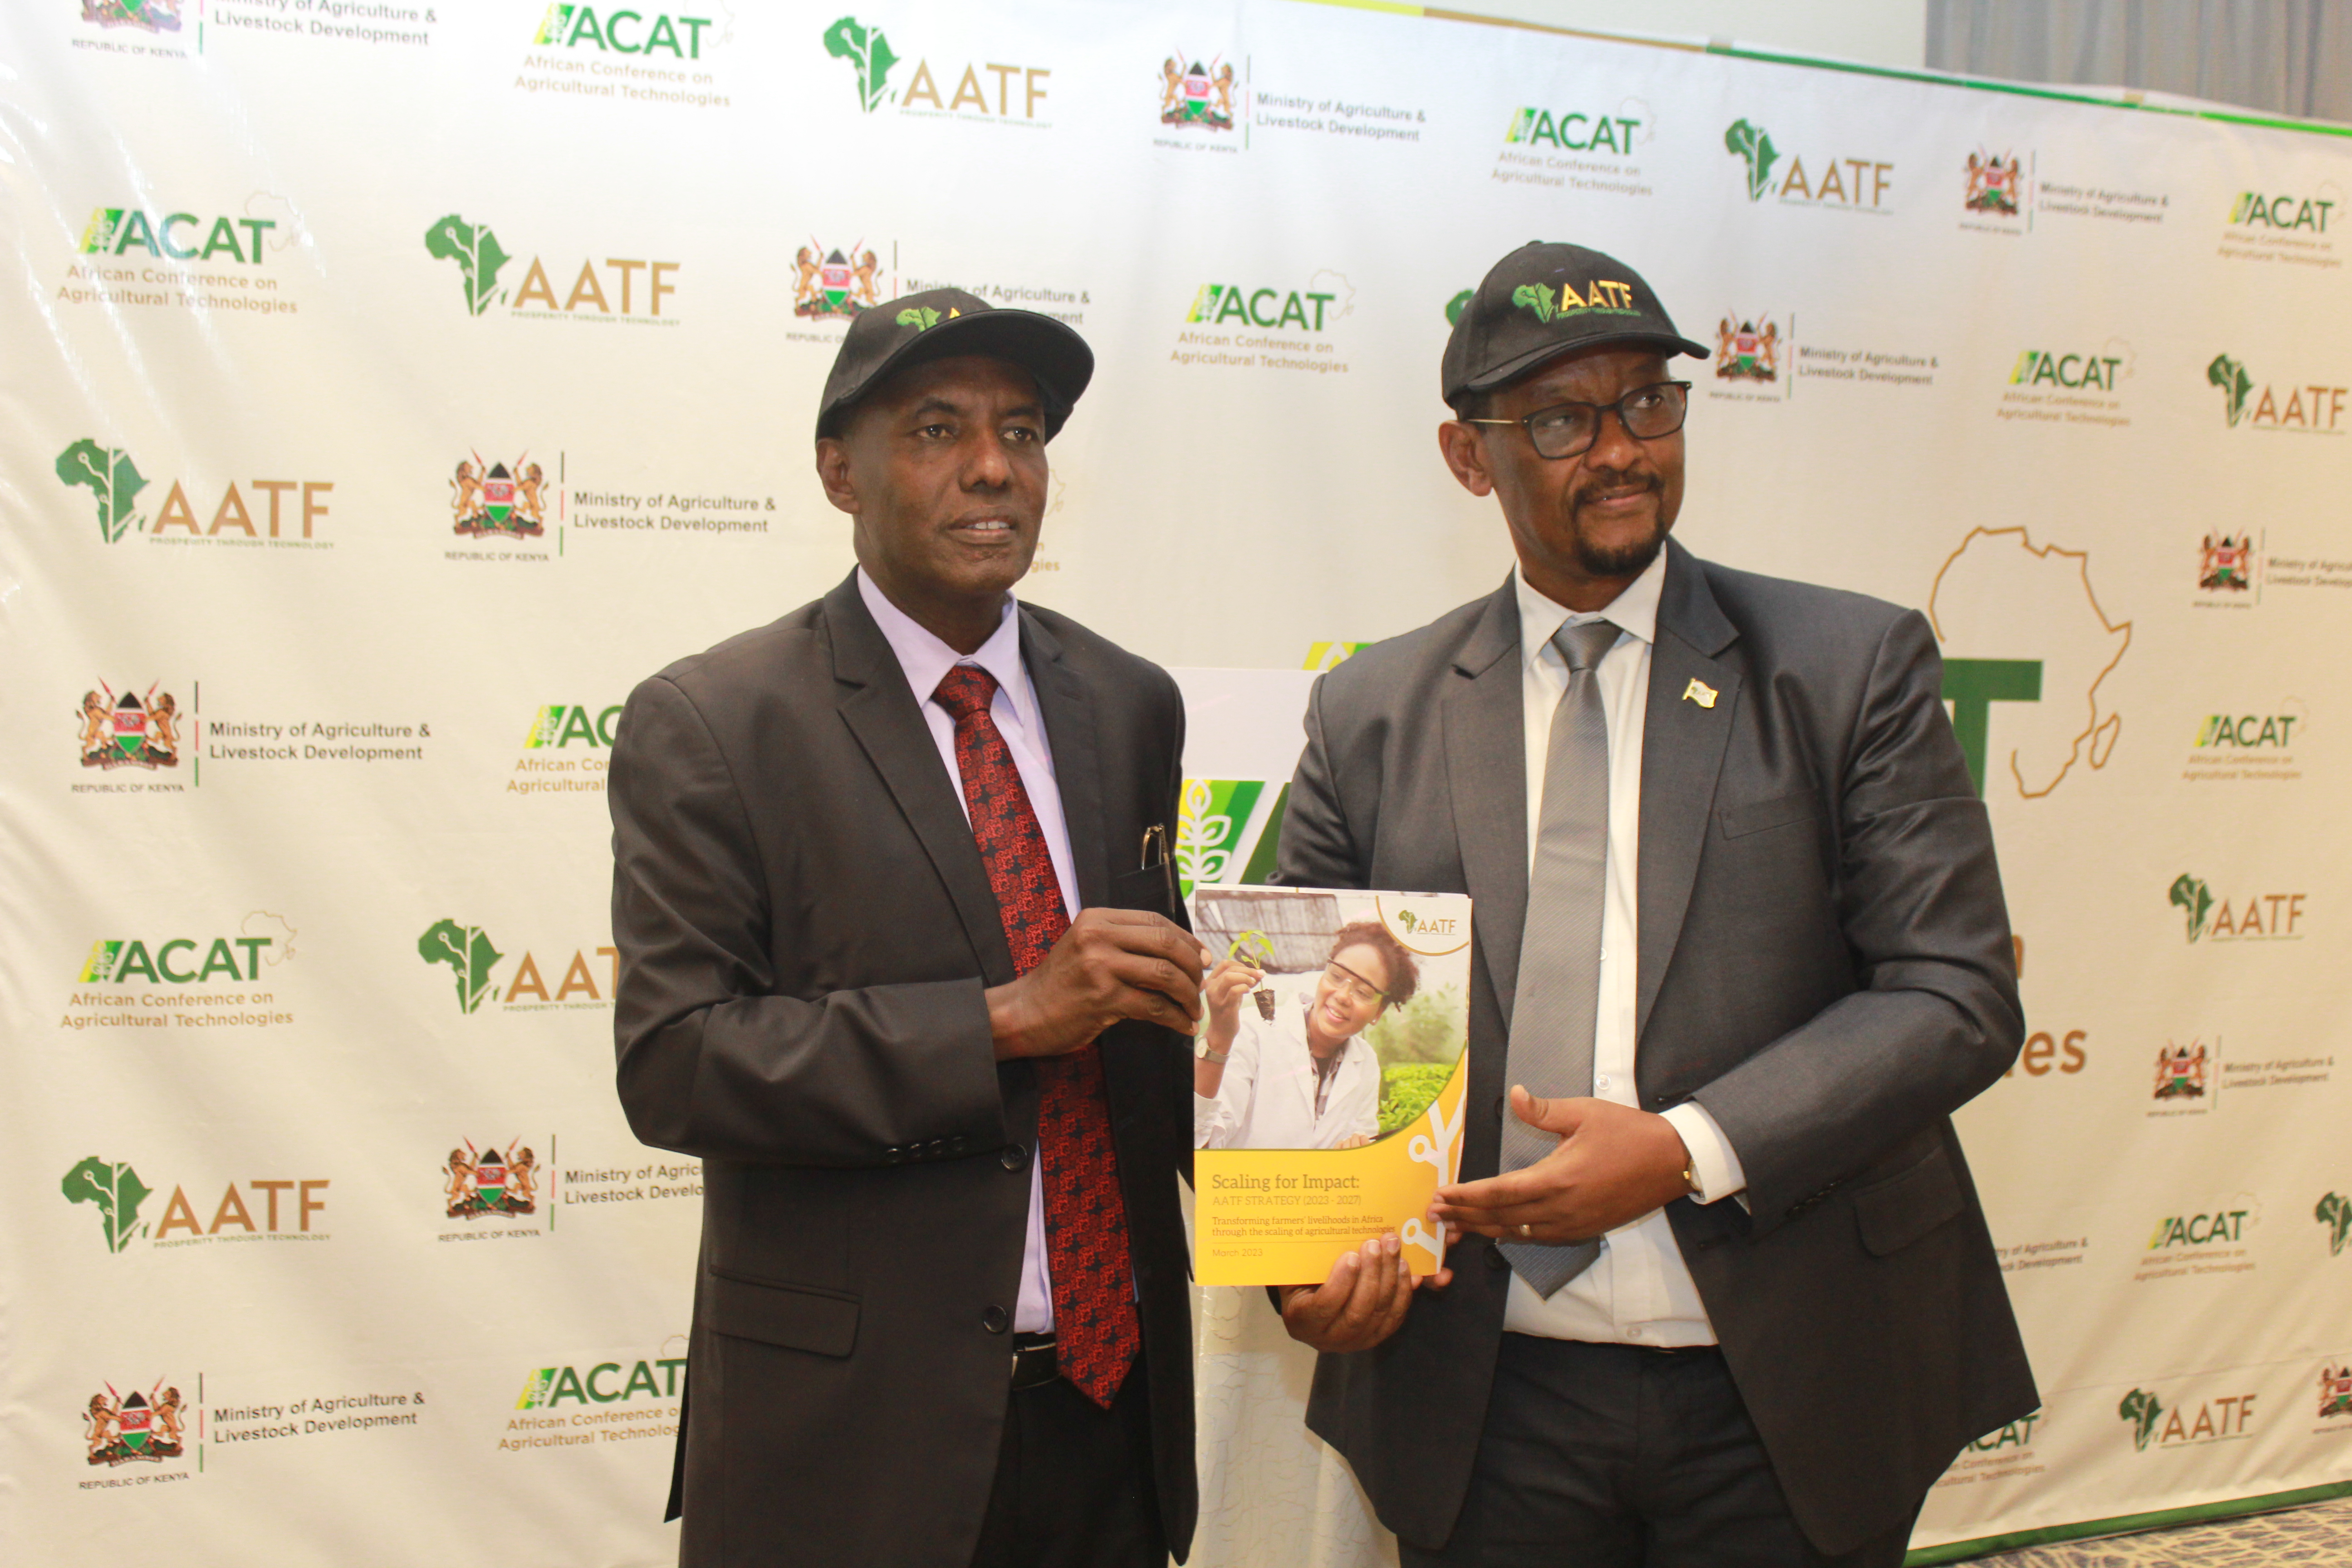  Government of Kenya and AATF to host inaugural African Conference on Agricultural Technologies (ACAT)